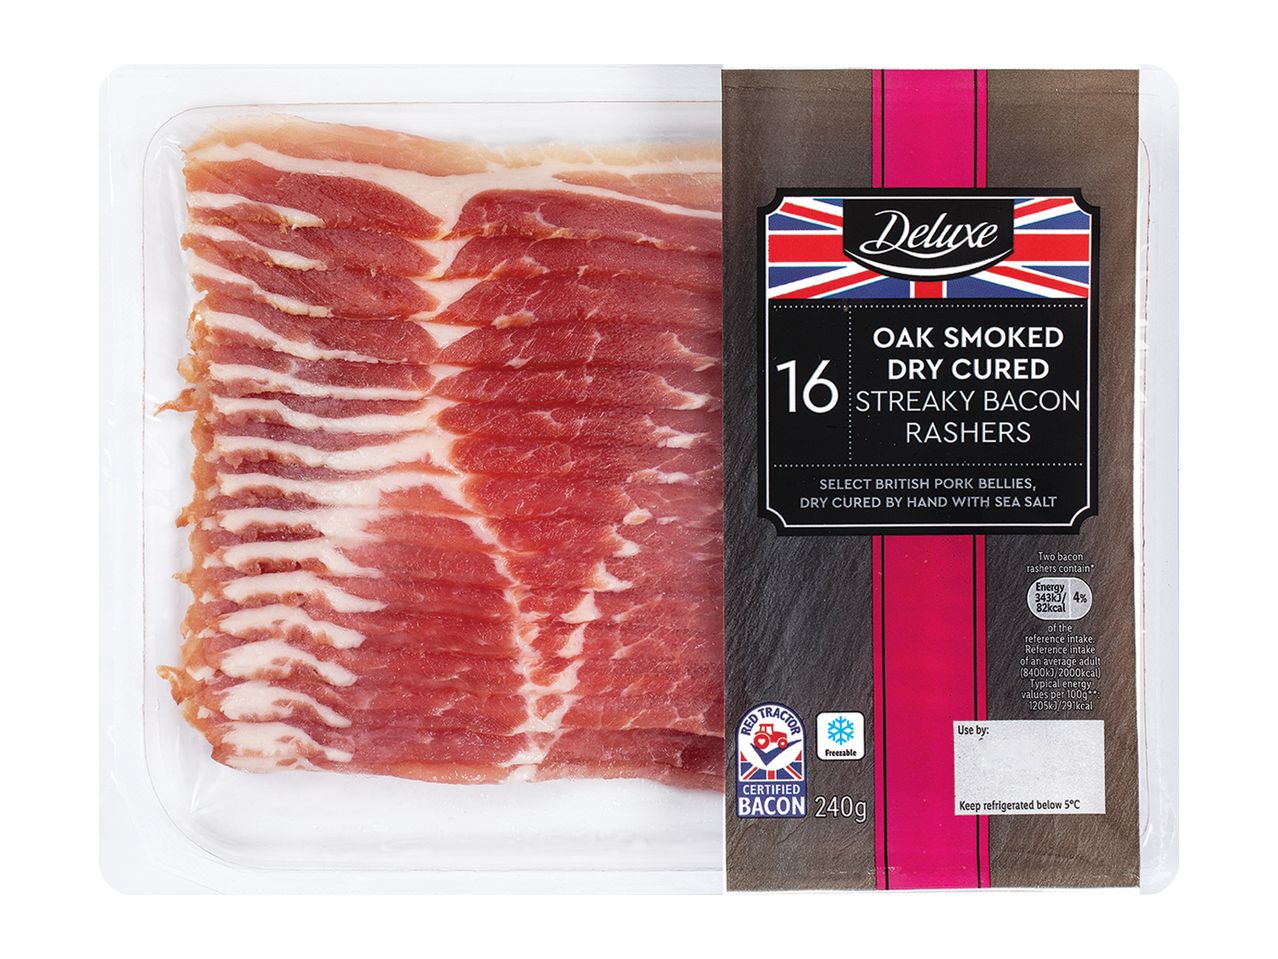 Go to full screen view: Deluxe RSPCA Dry Cured Streaky Bacon Assorted - Image 2